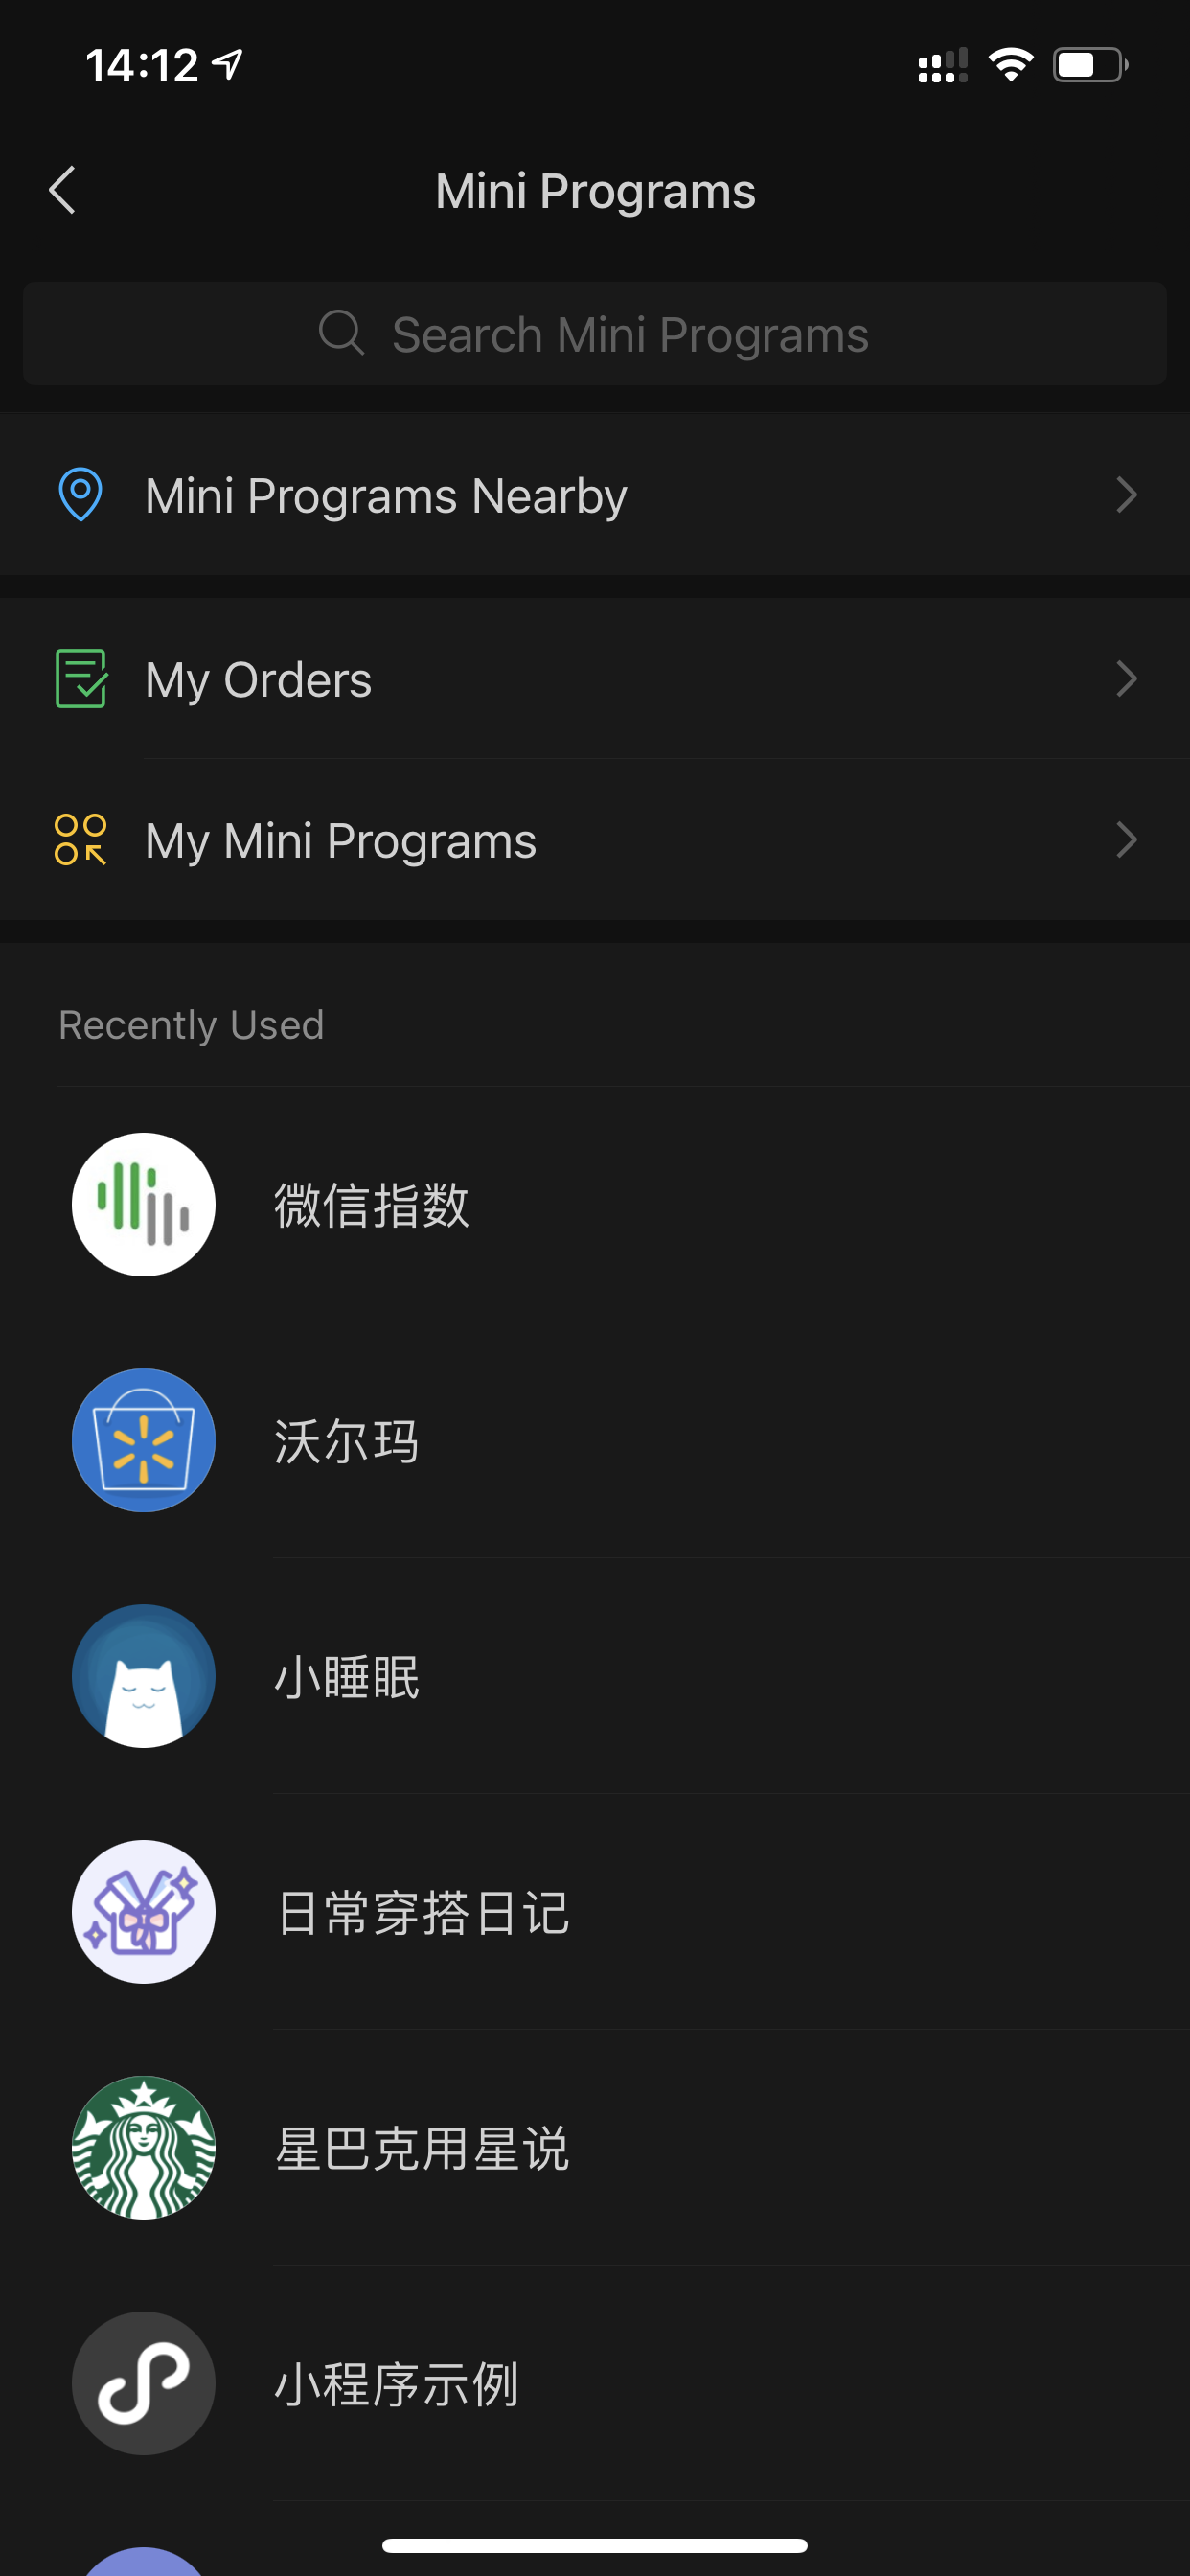 List of recently launched mini apps in the WeChat super app.